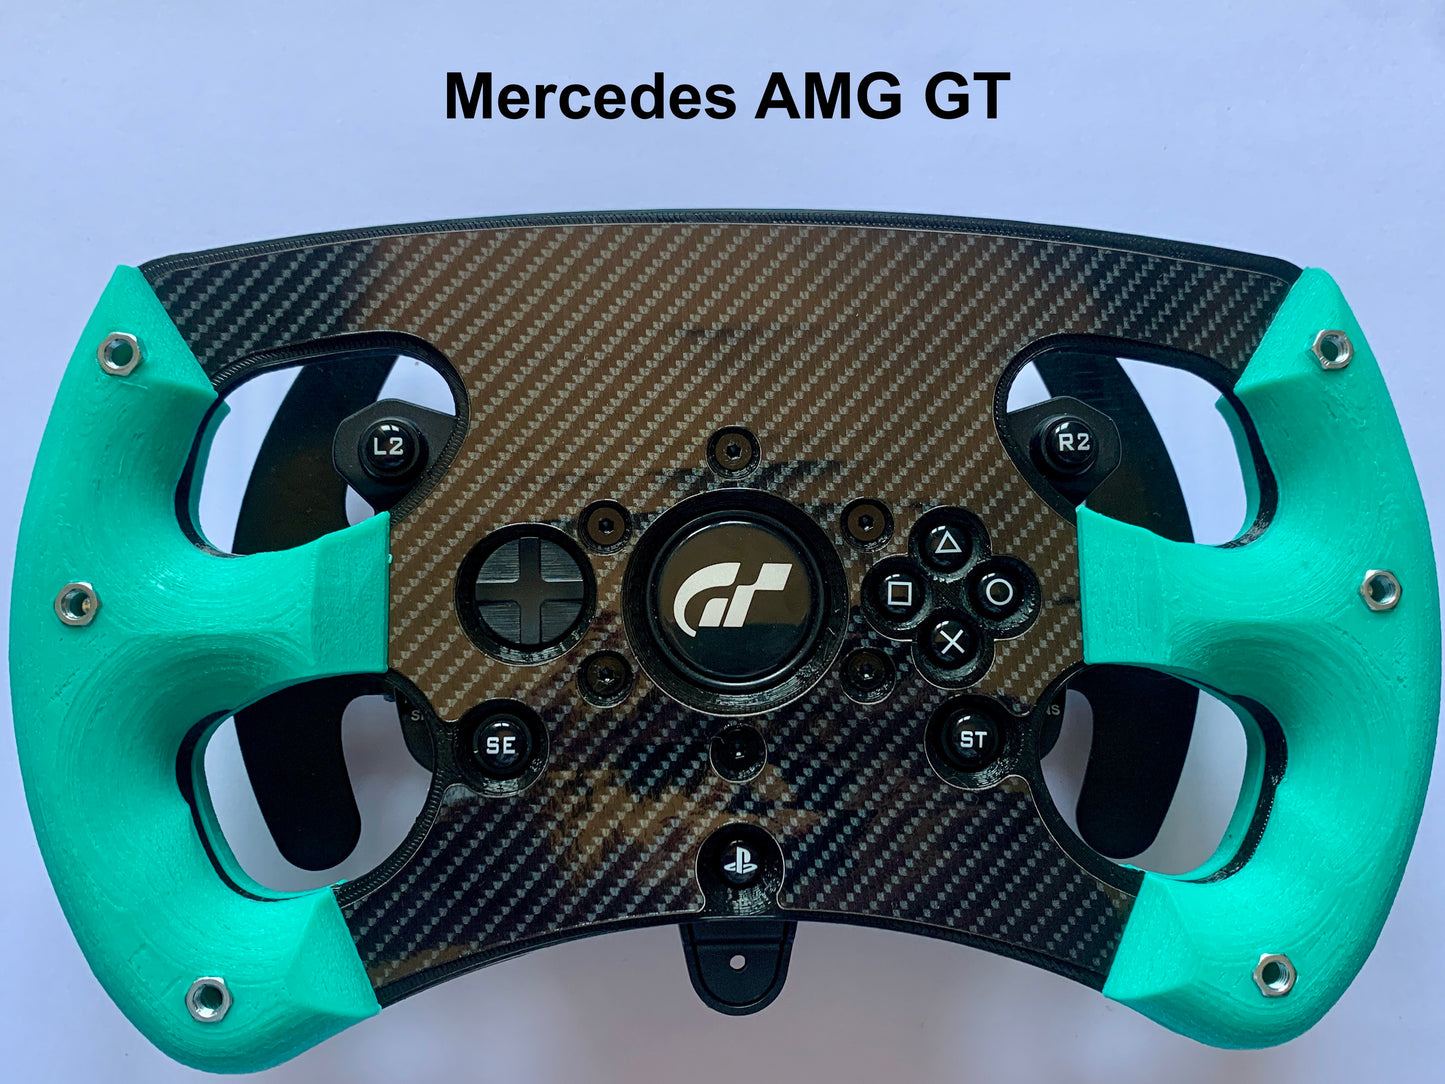 Mercedes AMG Version GT Open Wheel Mod for Thrustmaster T300